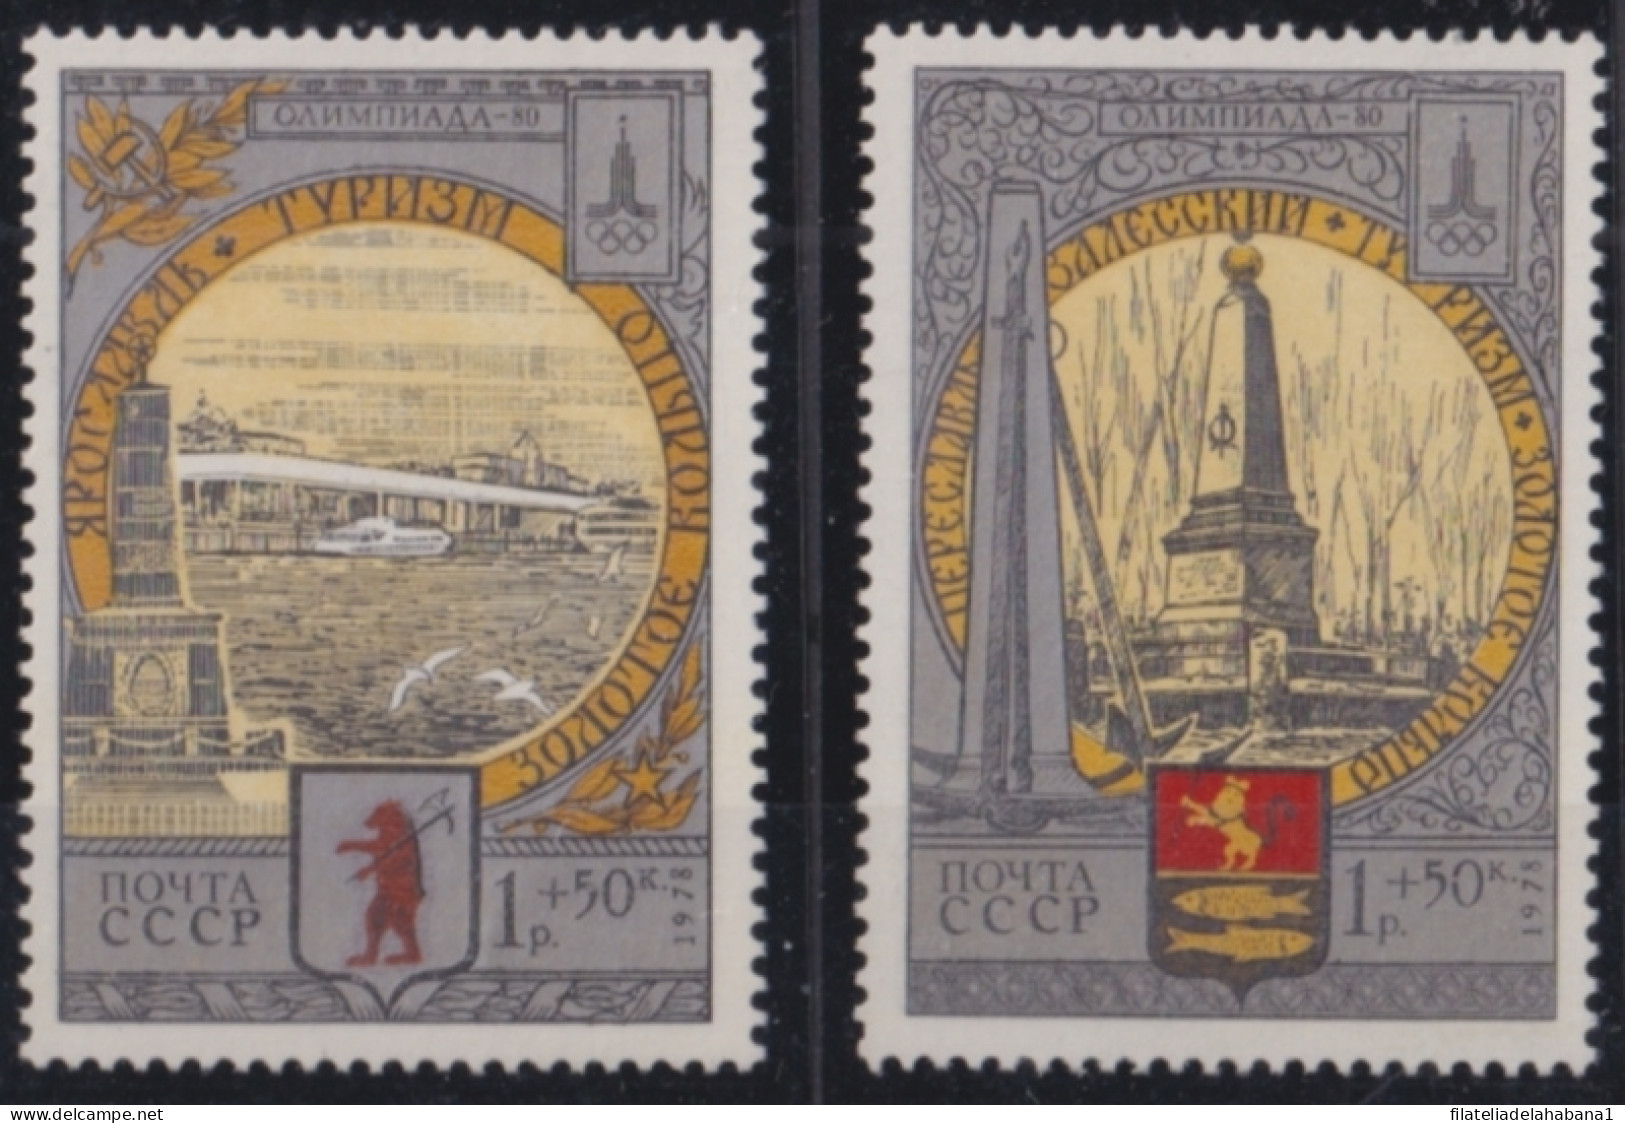 F-EX50227 RUSSIA MNH 1978 OLYMPIC GAMES MOSCOW TOURISM CITY.  - Summer 1980: Moscow